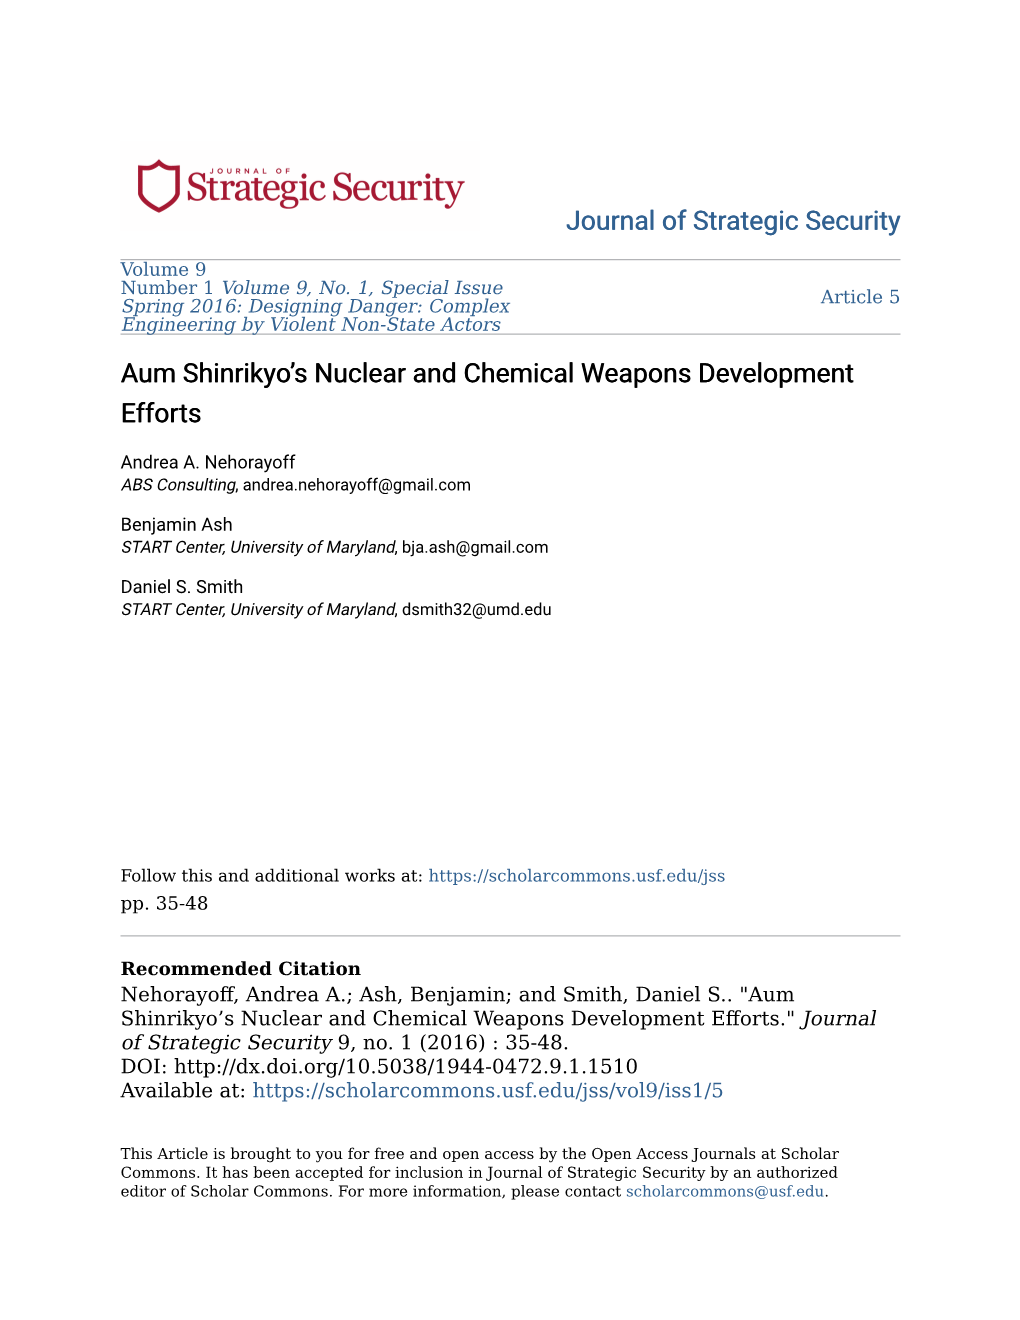 Aum Shinrikyo's Biological Weapons Program: Why Did It Fail?," Studies in Conflict & Terrorism 24 (2001), 296, Available At: Doi:10.1080/10576100120887